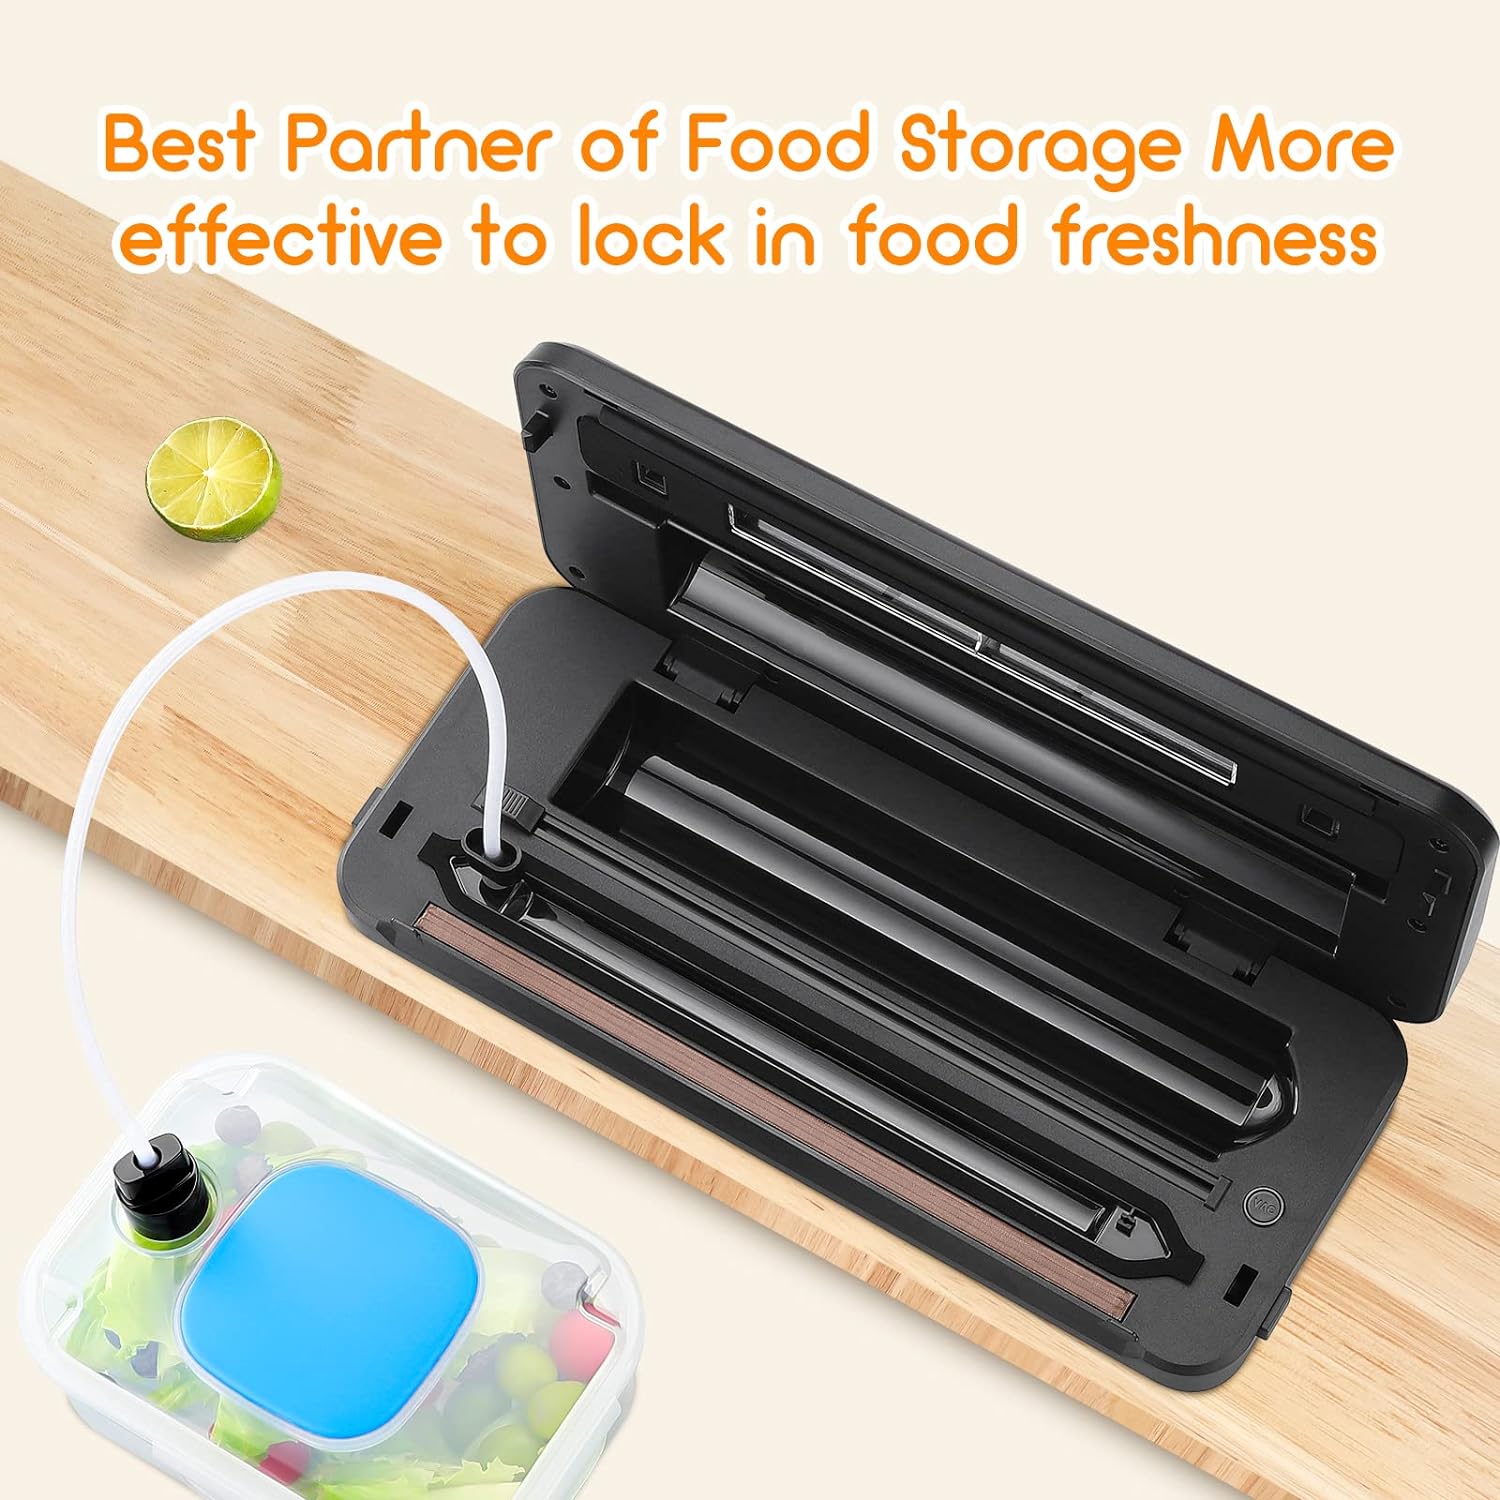 INKBIRD Vacuum Sealer Machine with Starter Kit Automatic PowerVac Air Sealing Machine for Food Preservation Dry & Moist Sealing Modes Built-in Cutter Easy Cleaning and Storage INK-VS01 Version